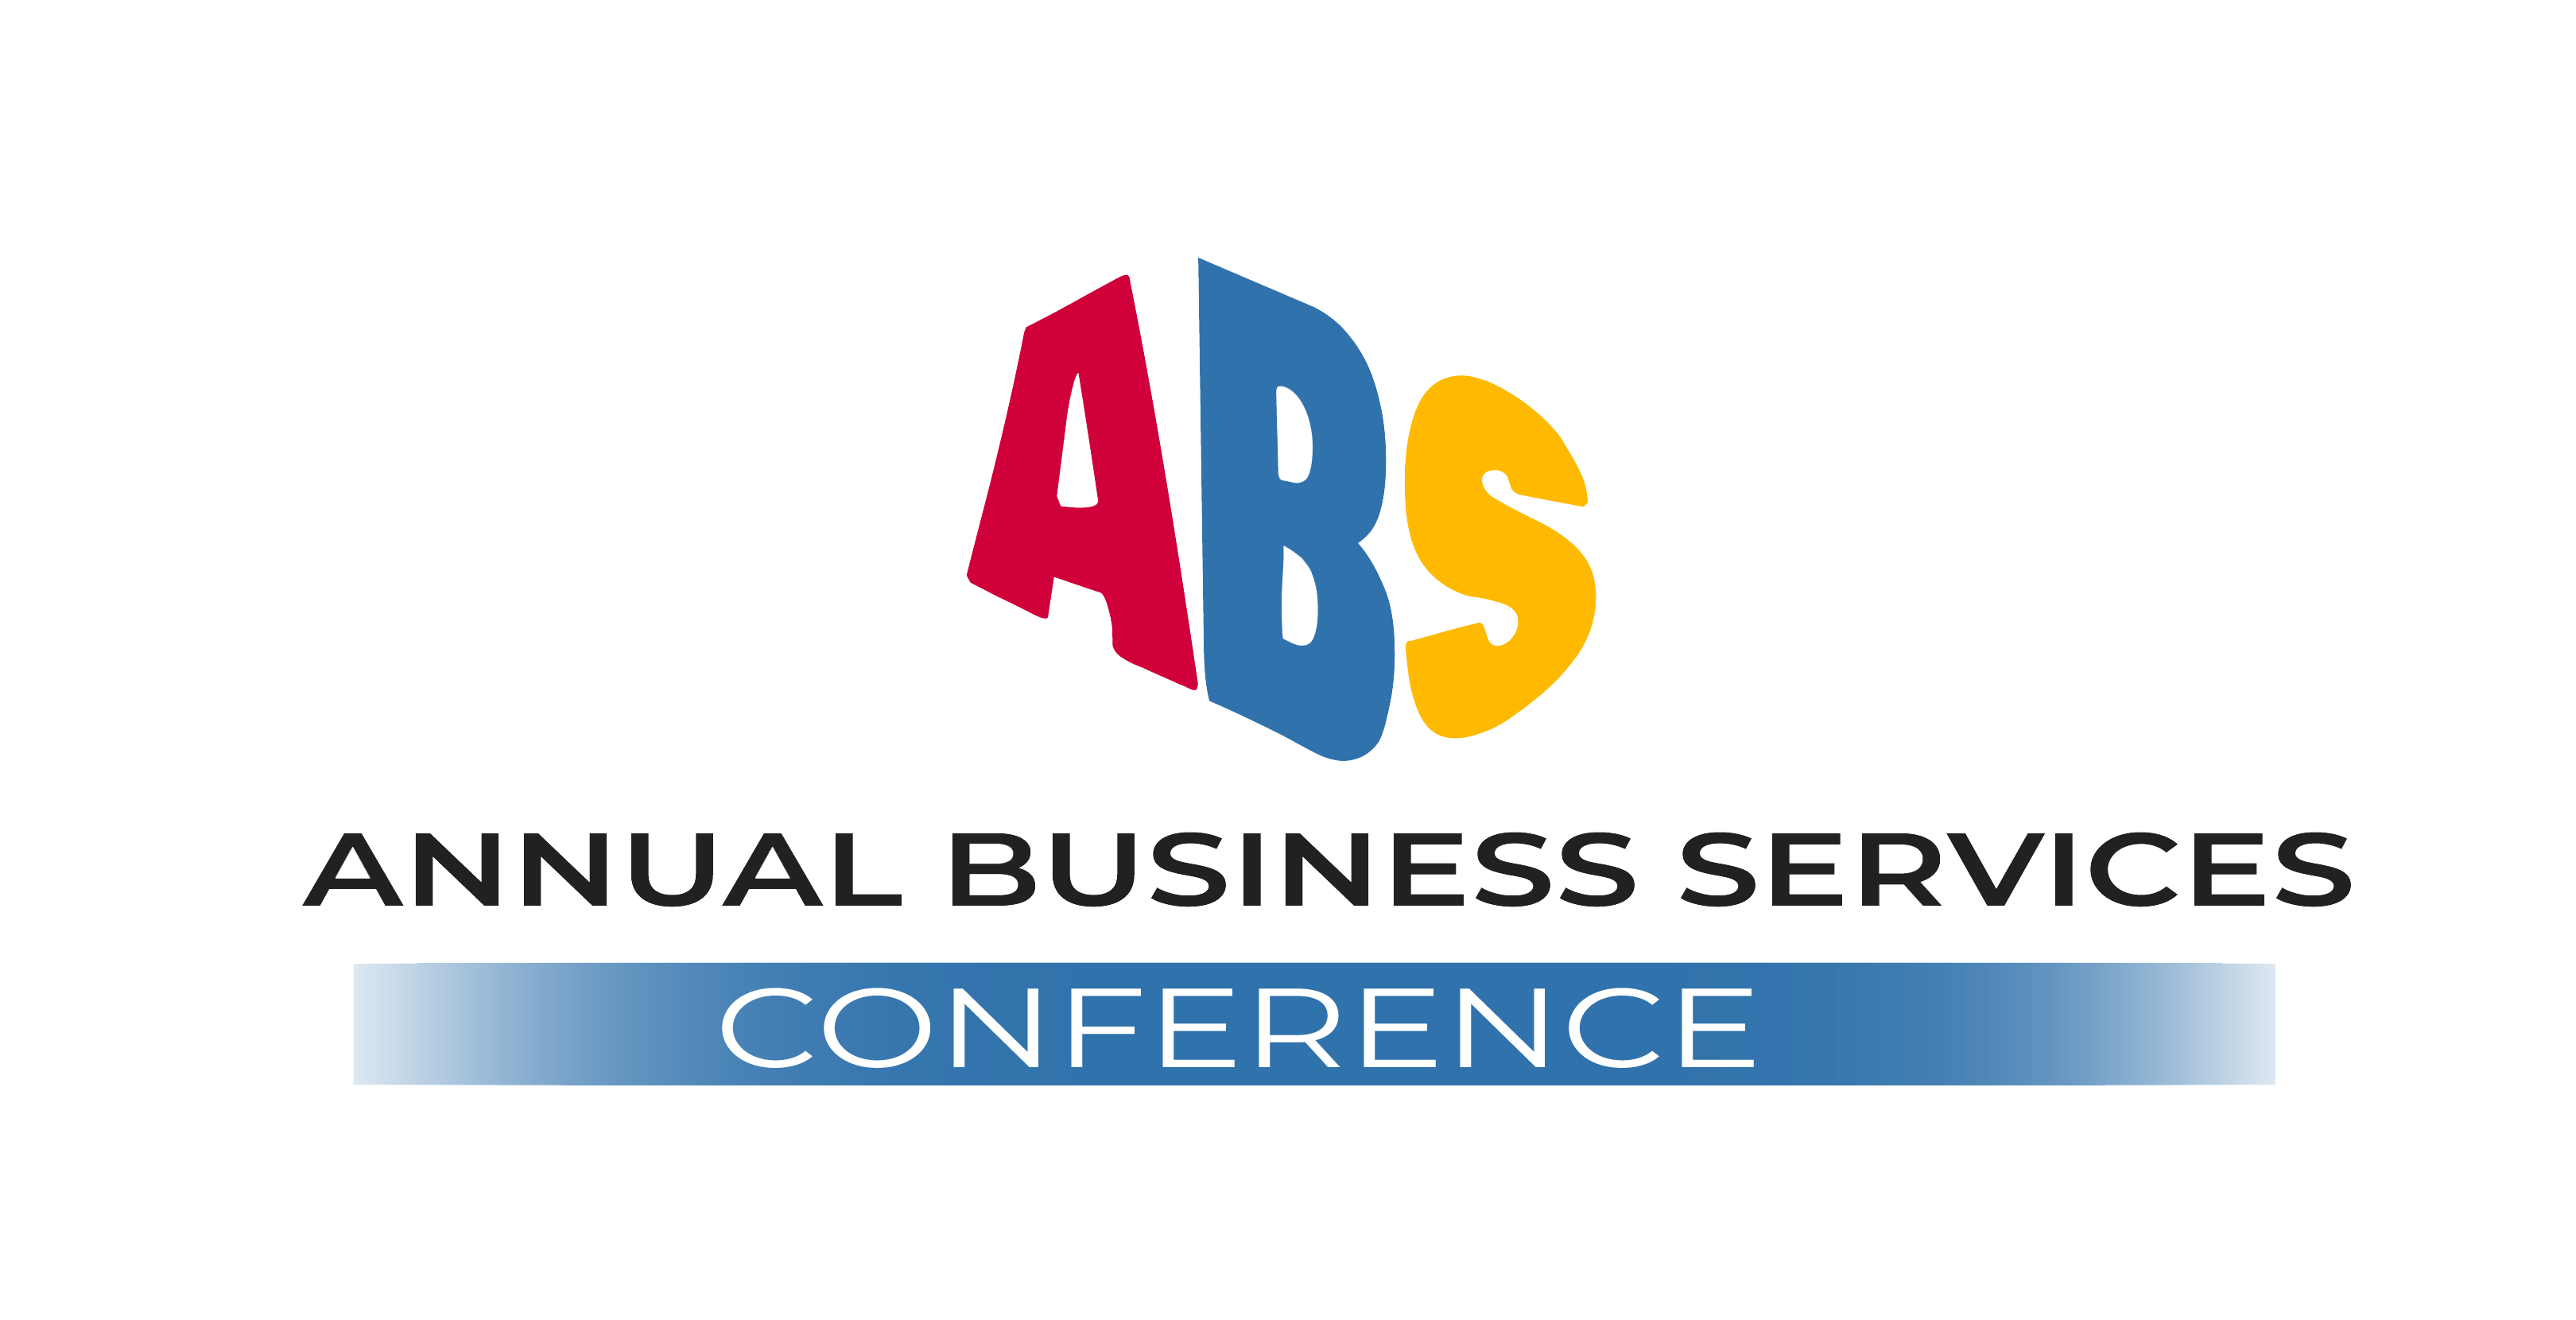 Annual Business Services Conference